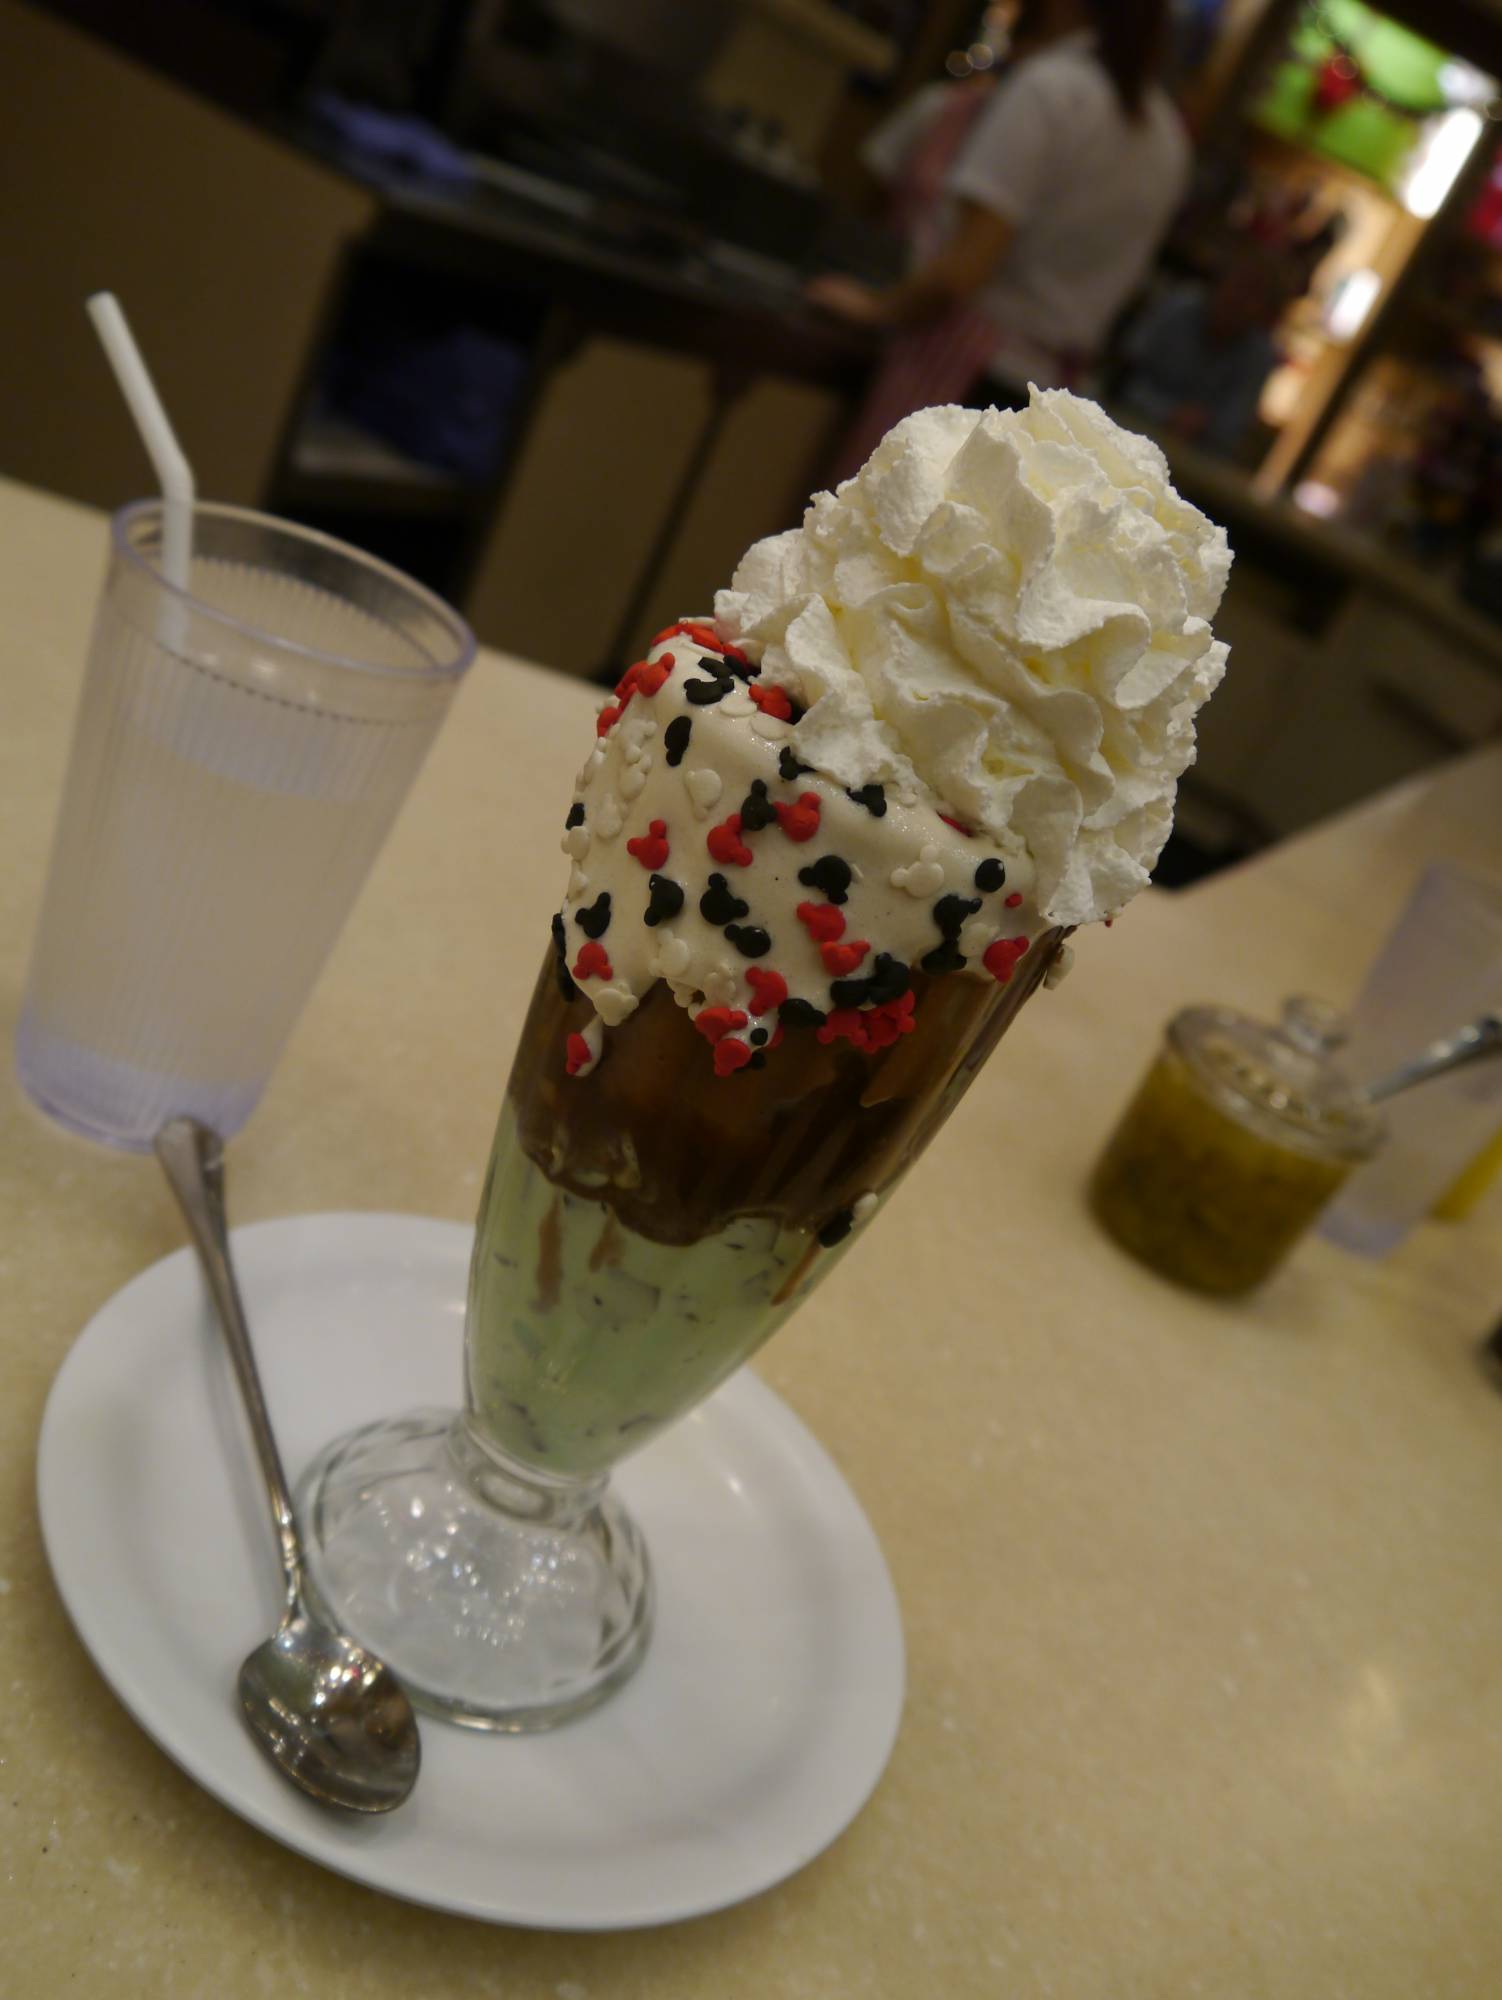 Enjoy a sweet treat at the Disney Soda Shop and Studio Store in Hollywood |PassPorter.com